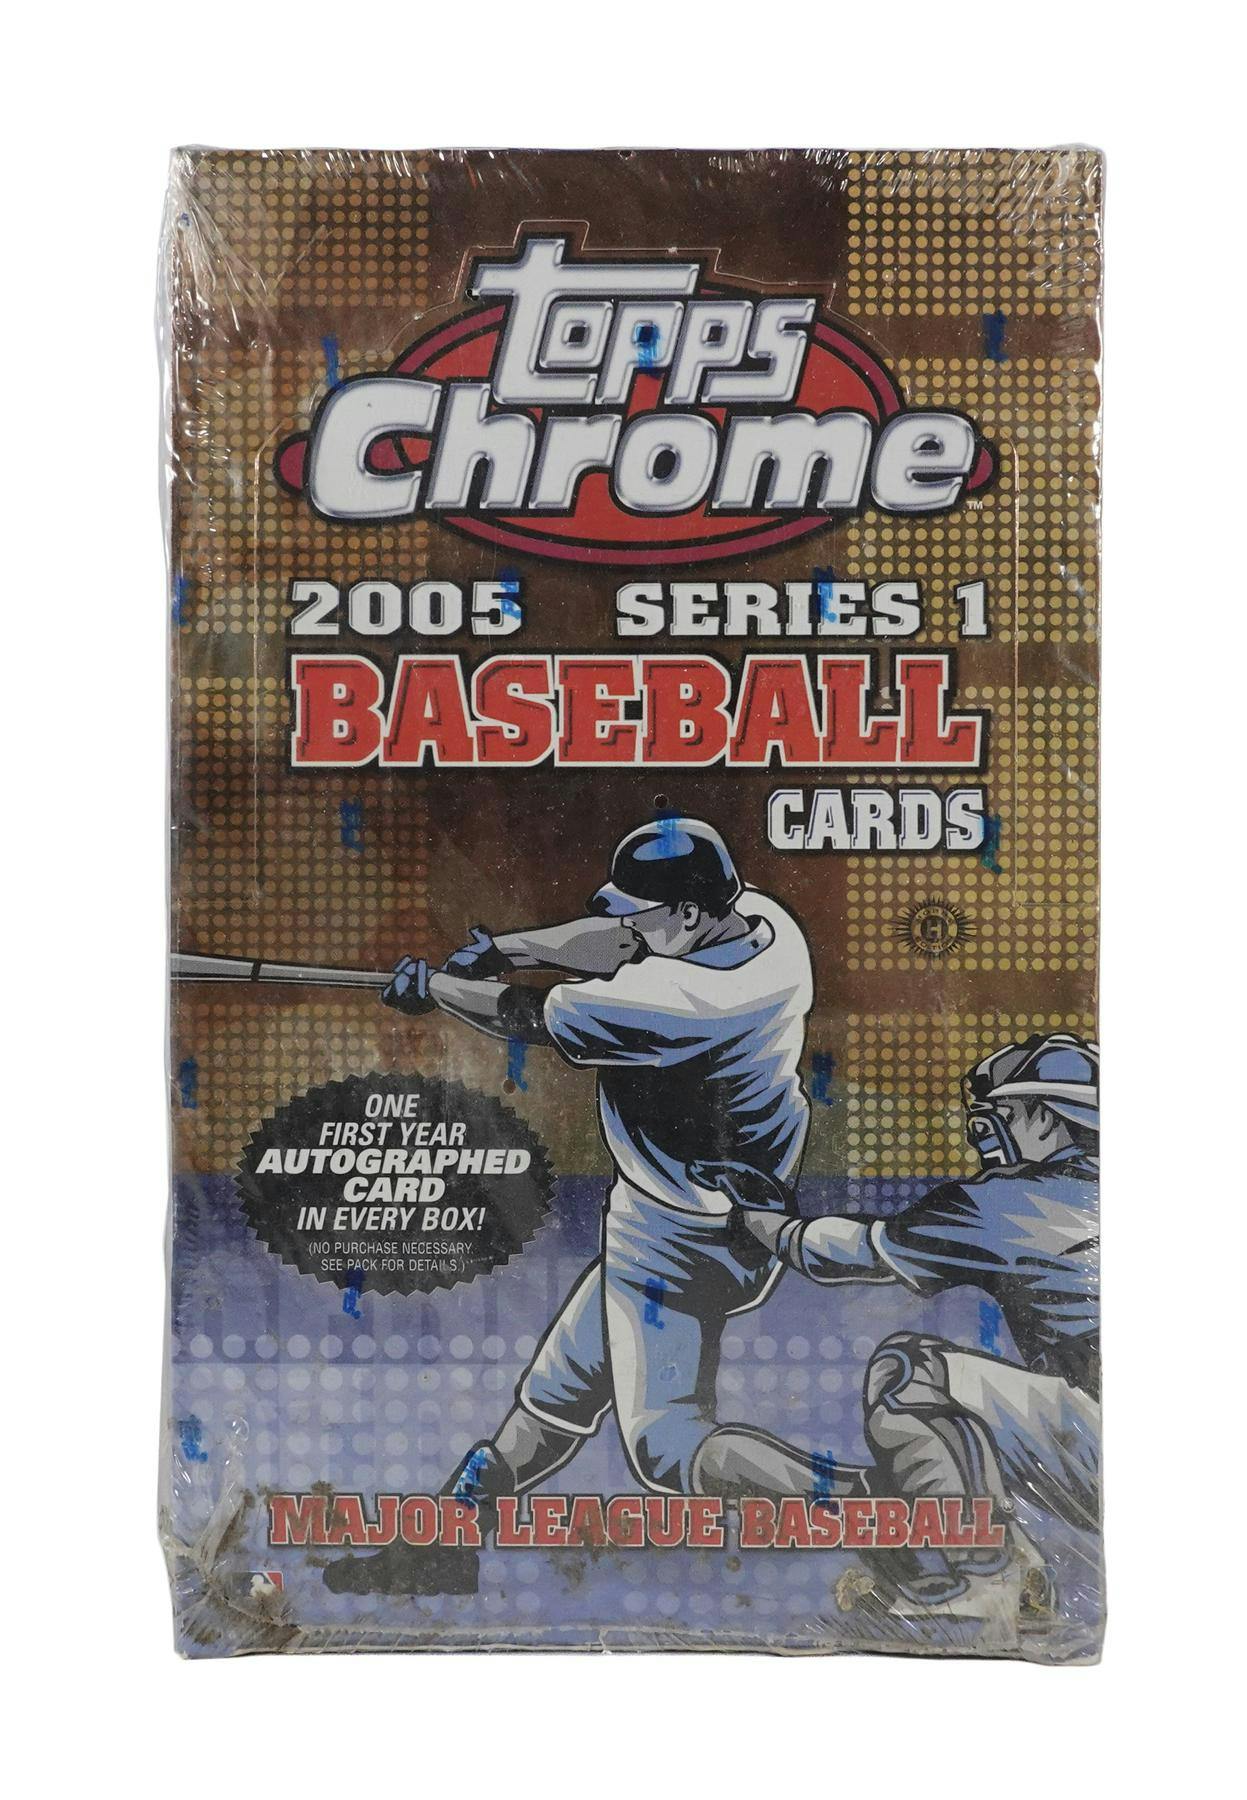 Alfonso Soriano Trading Cards: Values, Tracking & Hot Deals